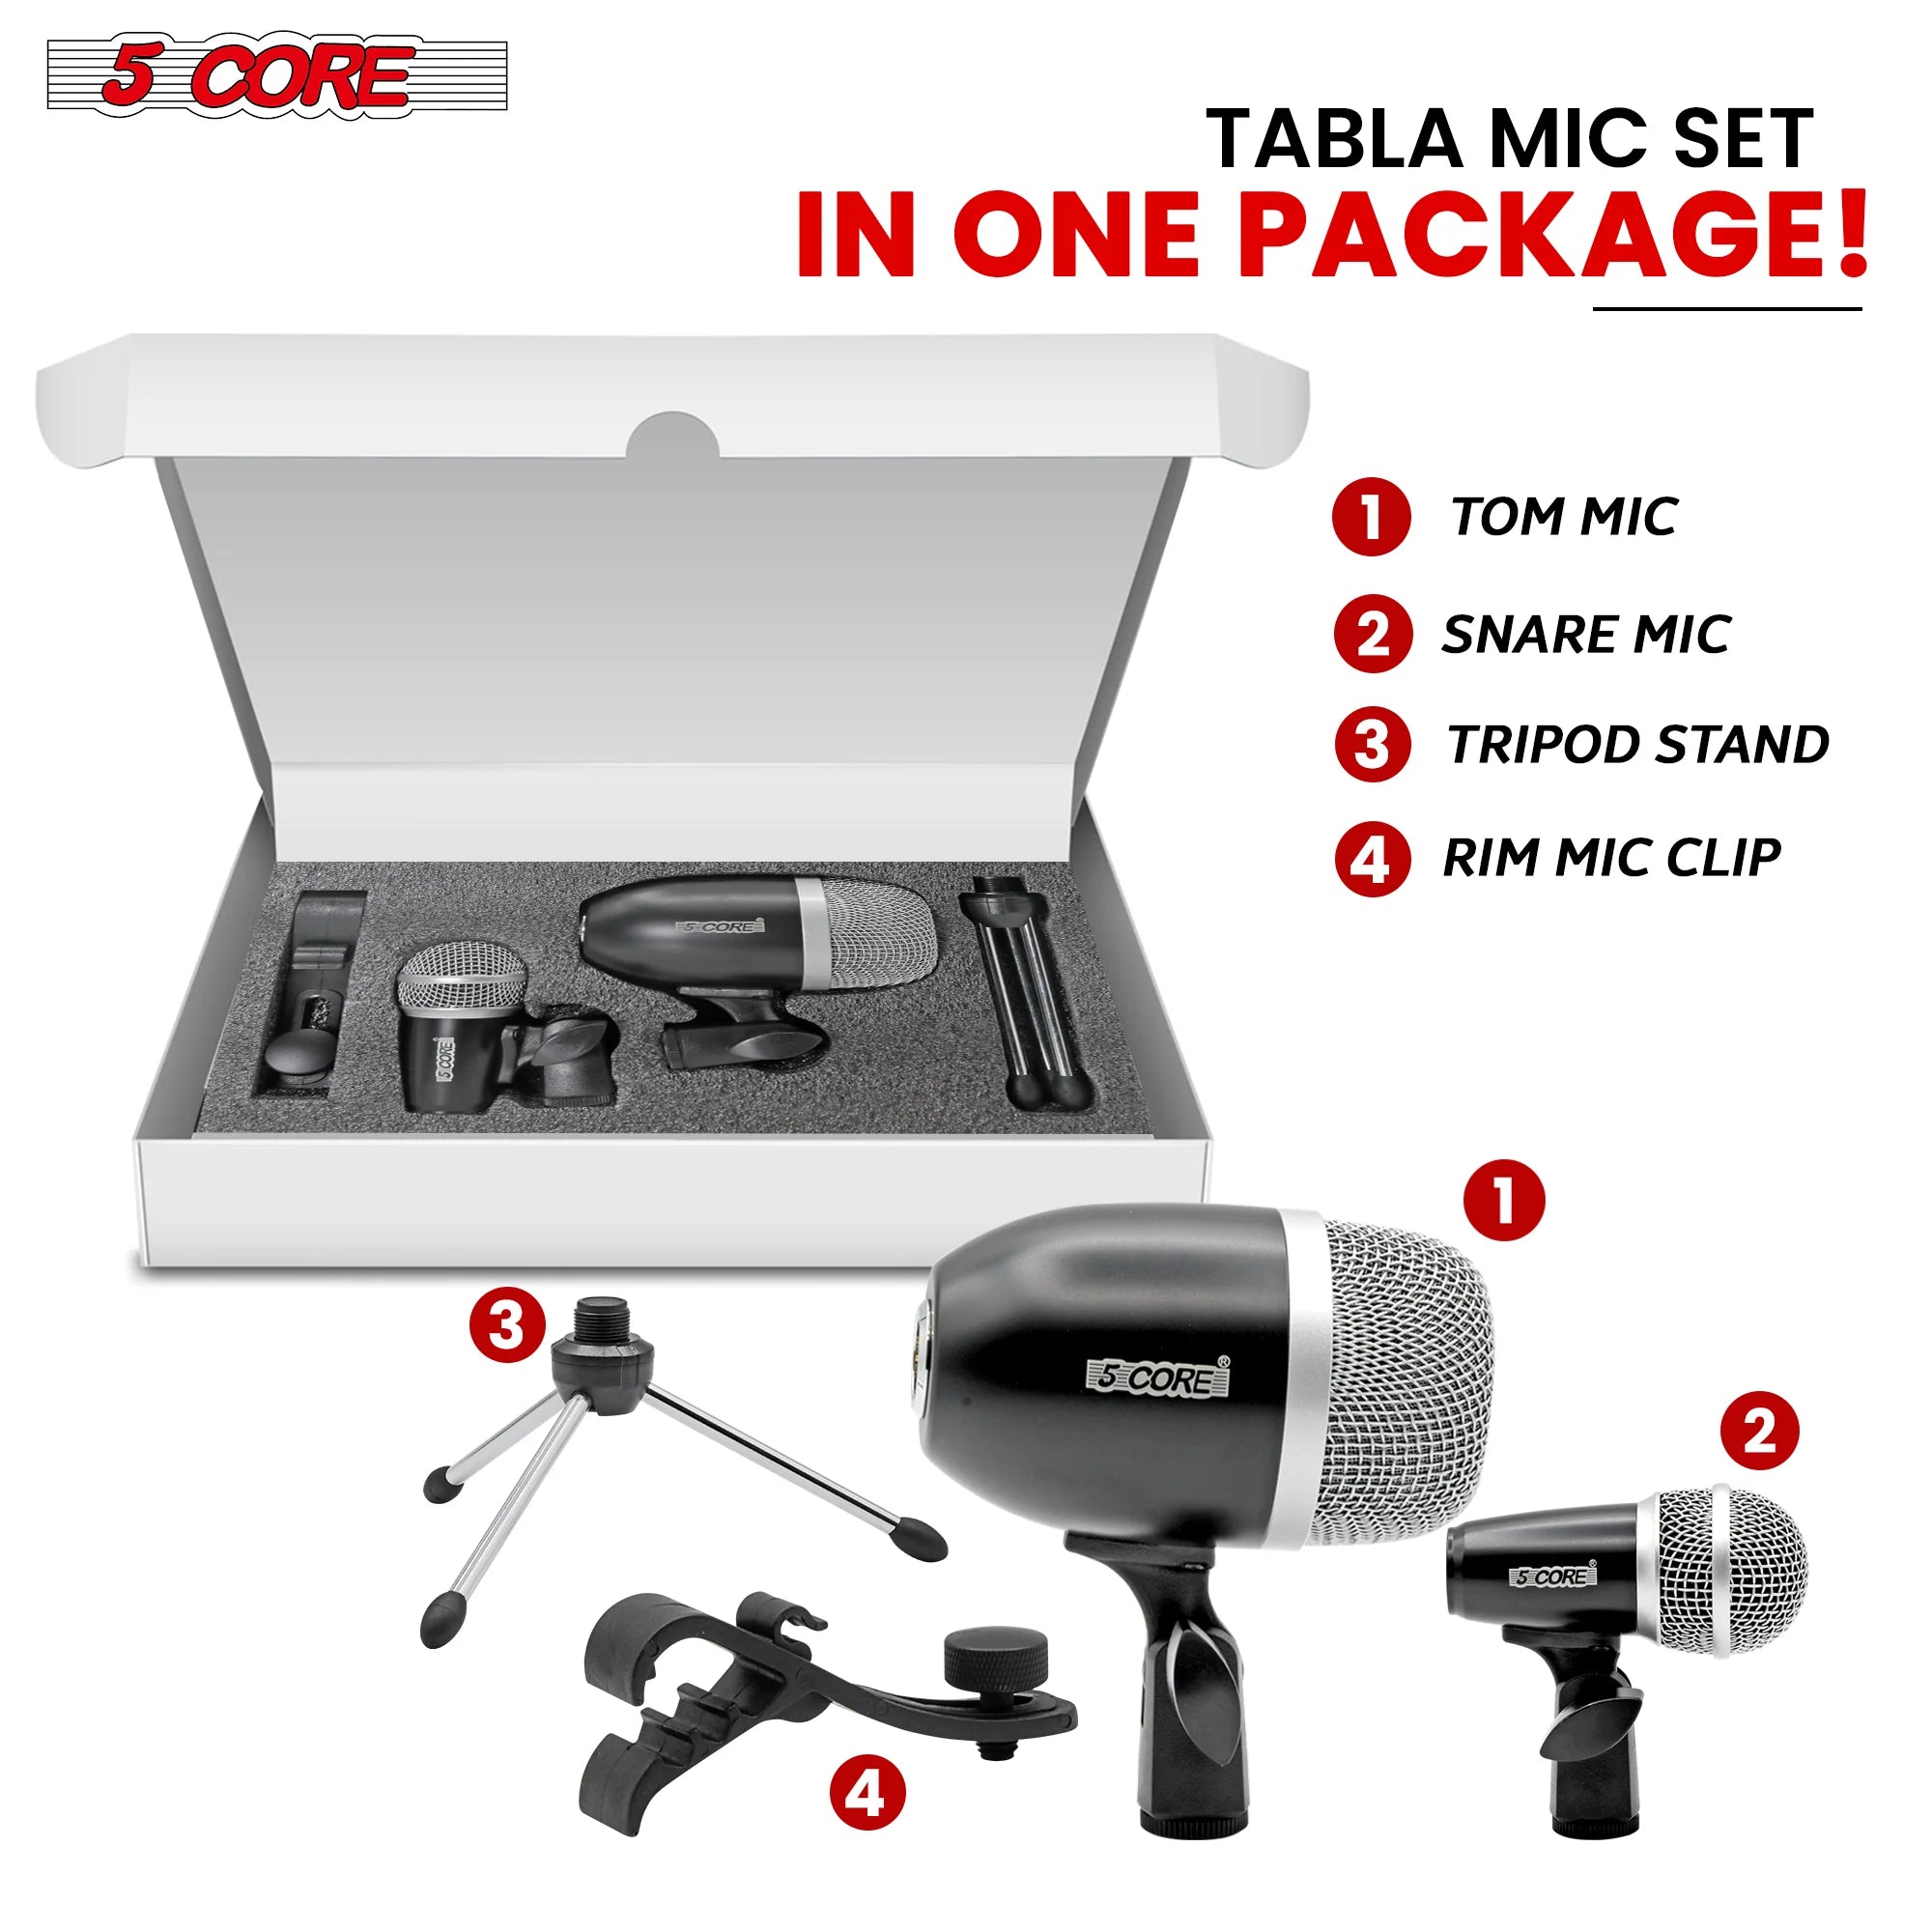 5Core Tabla Mic XLR Wired Uni Directional Snare Tom Instrument Microphone